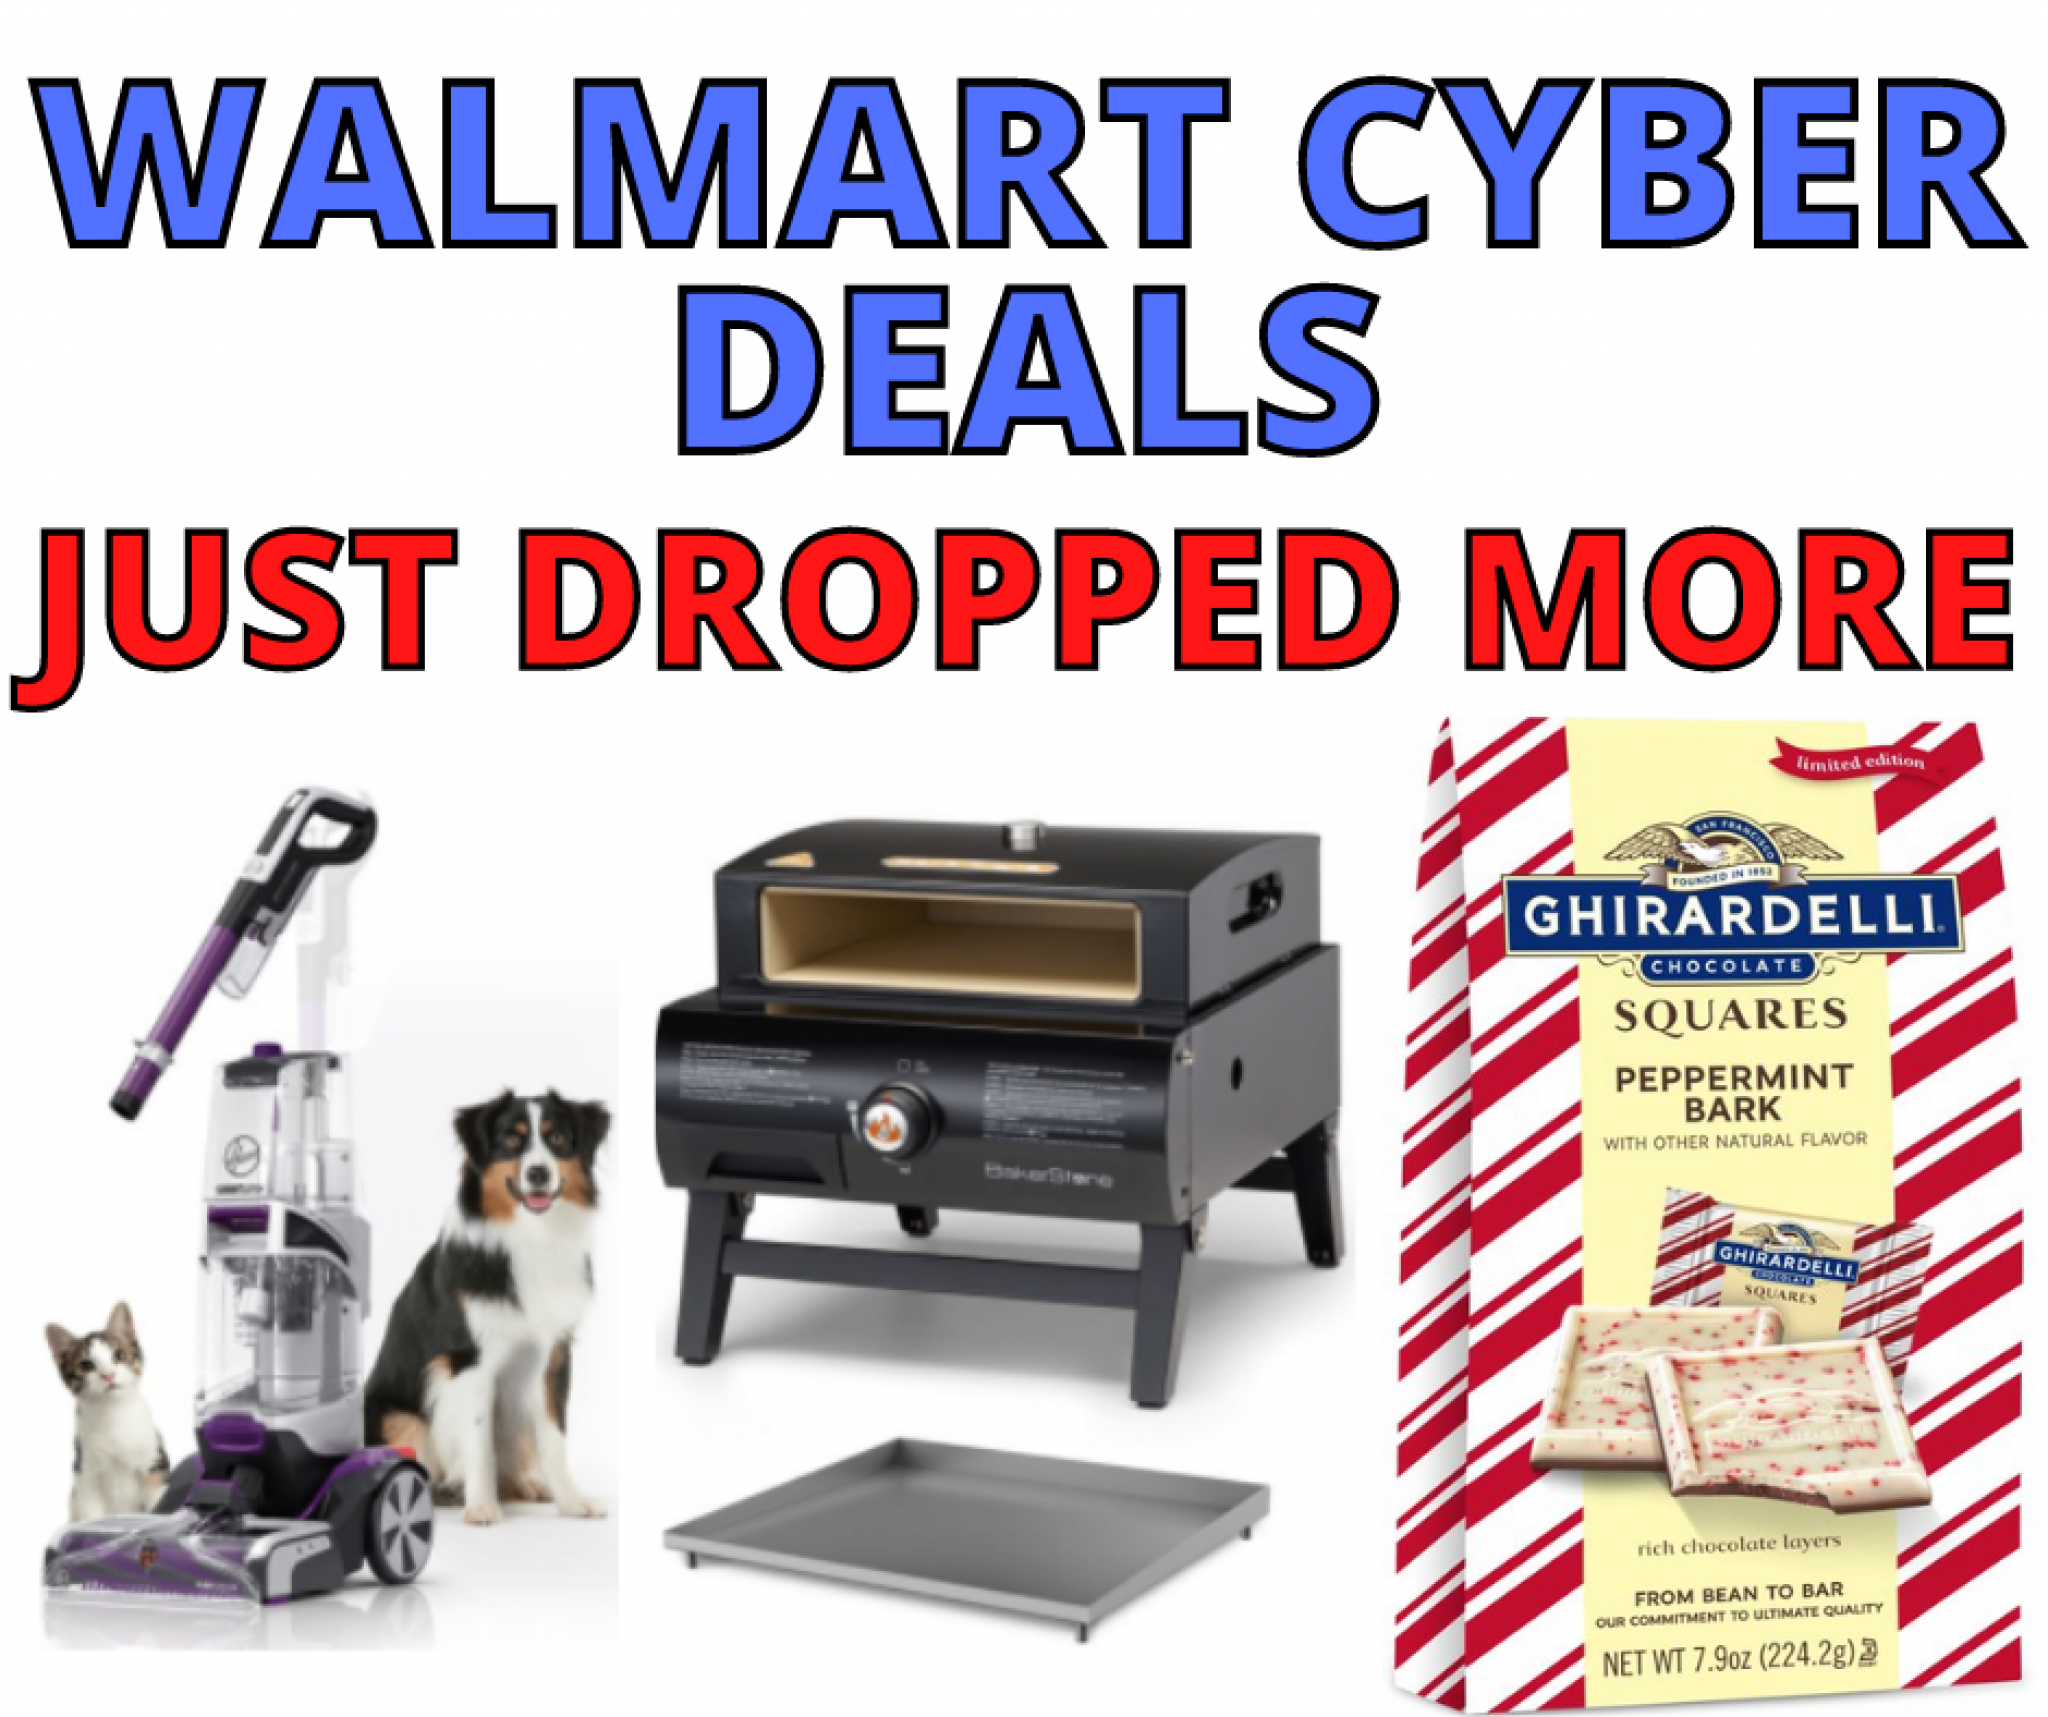 Walmart Cyber Deals JUST DROPPED MORE! Glitchndealz